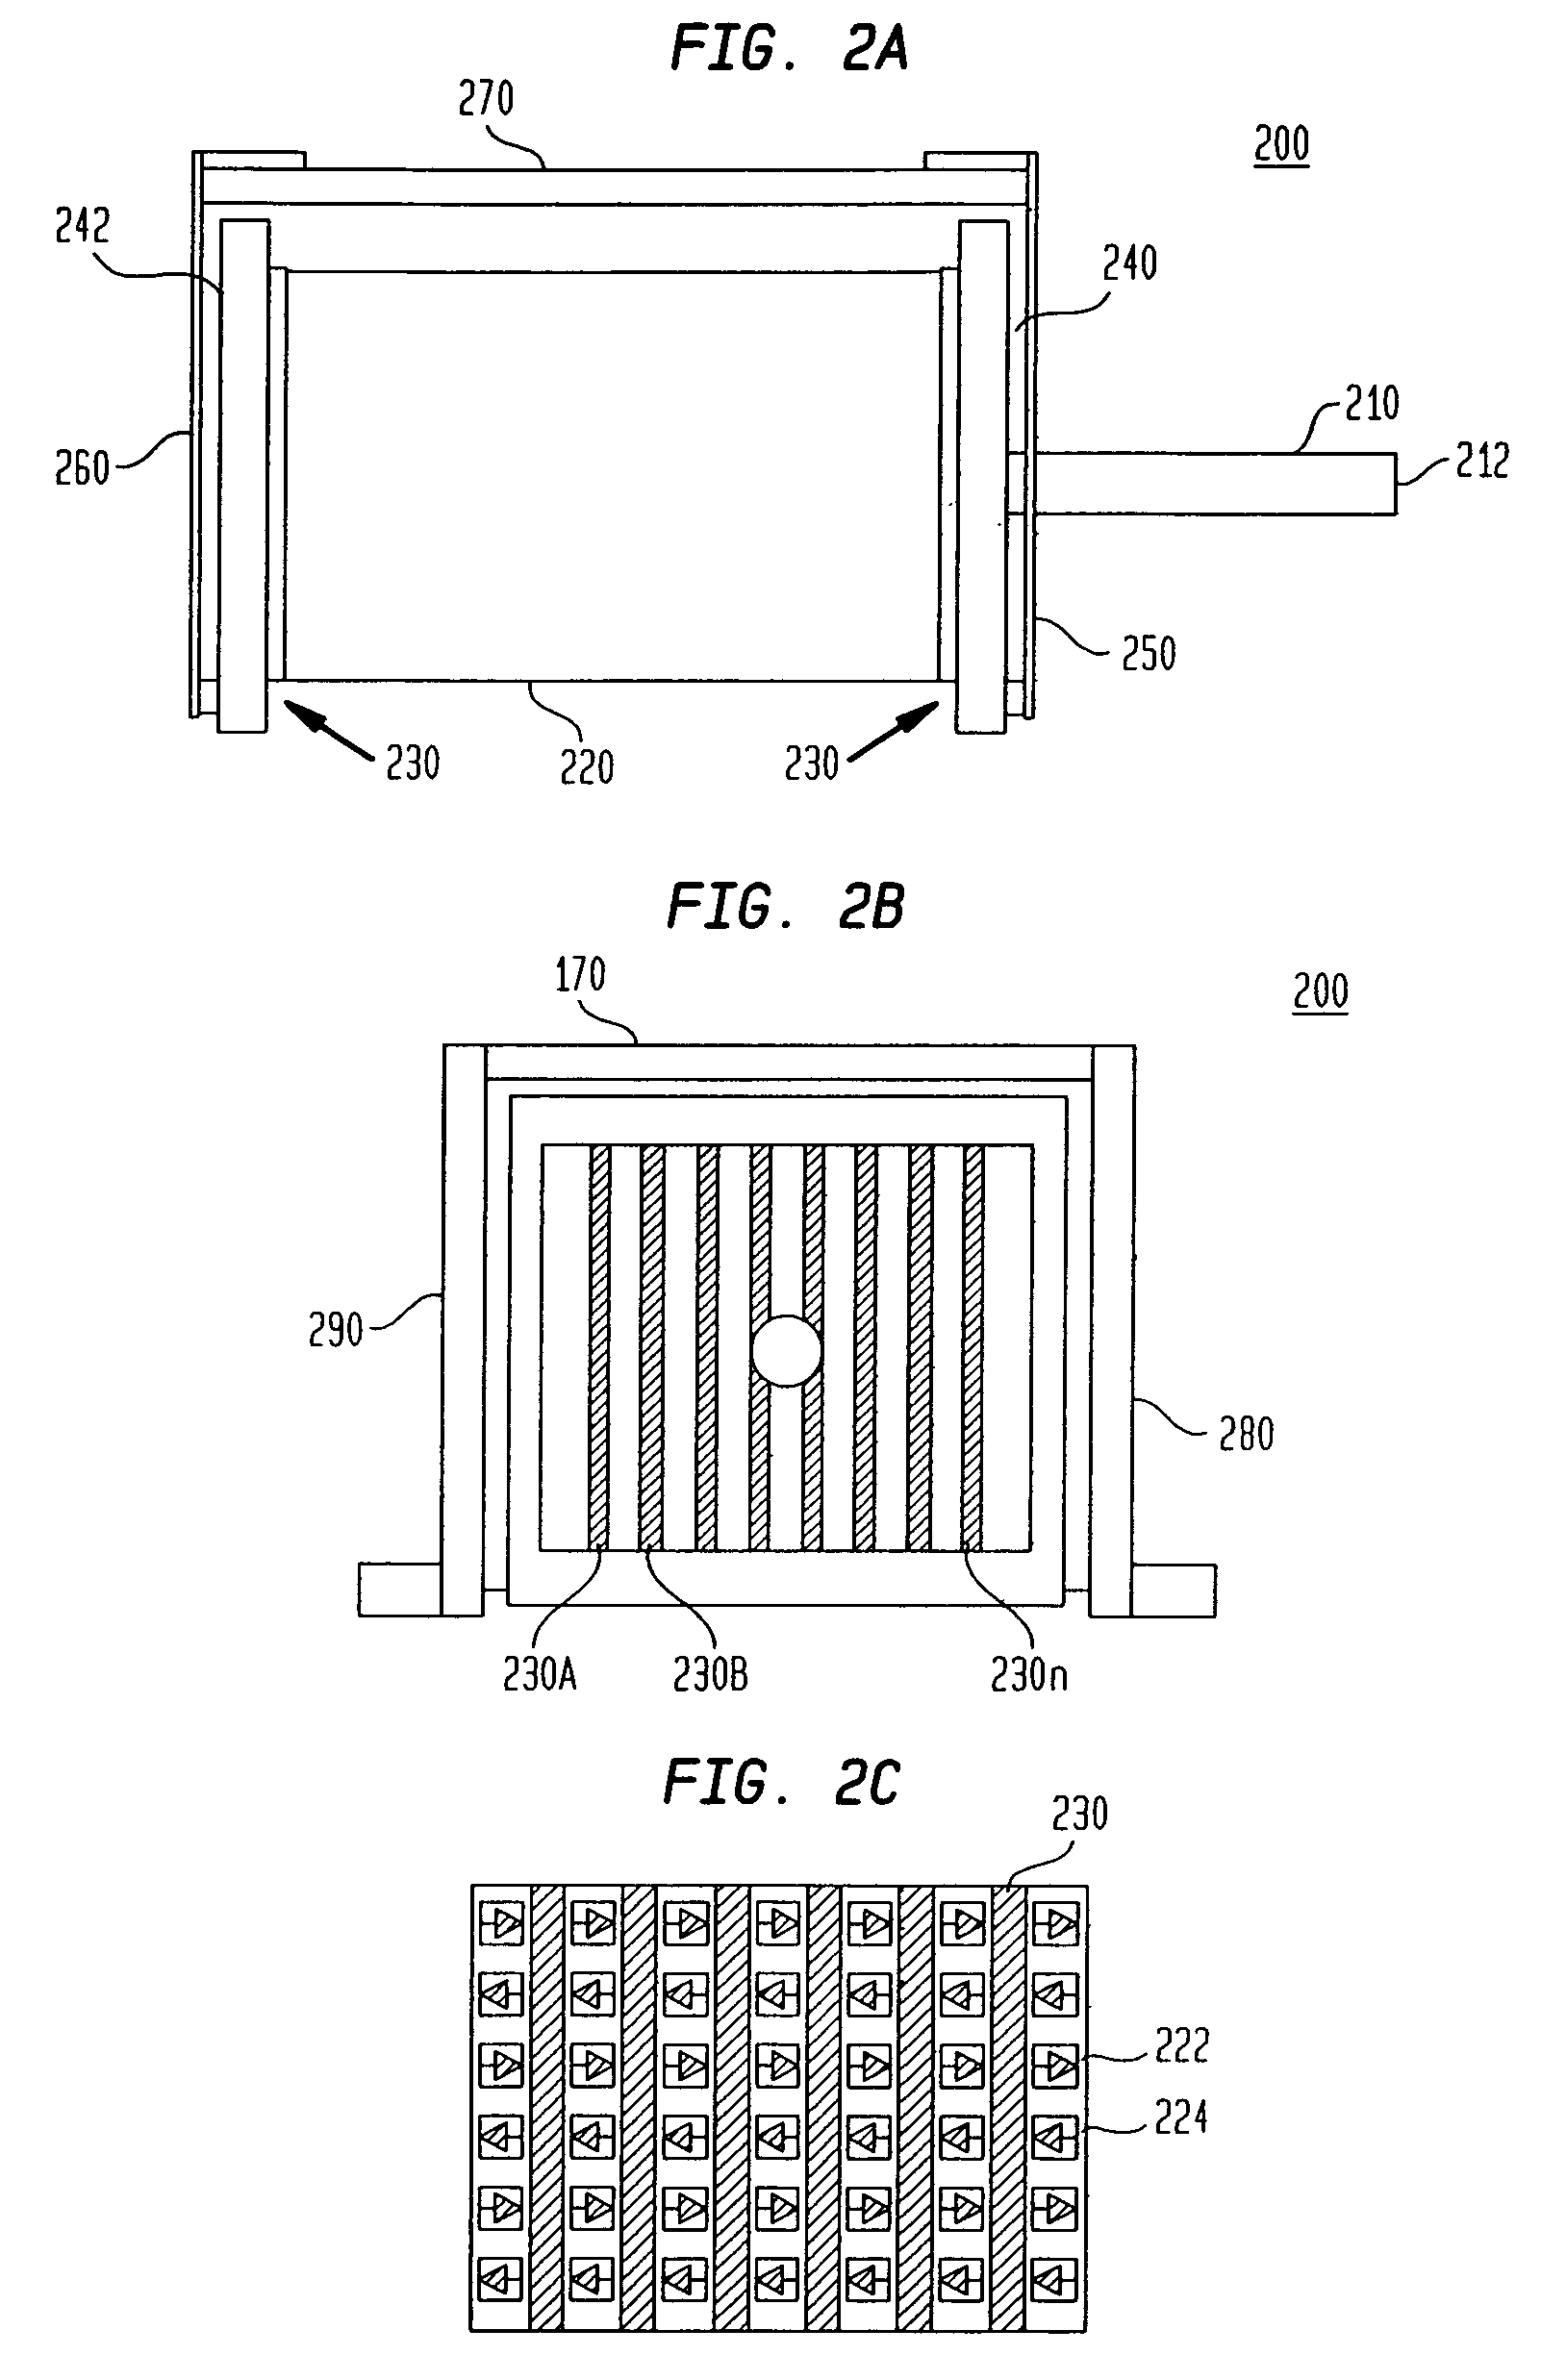 Optical element damping systems